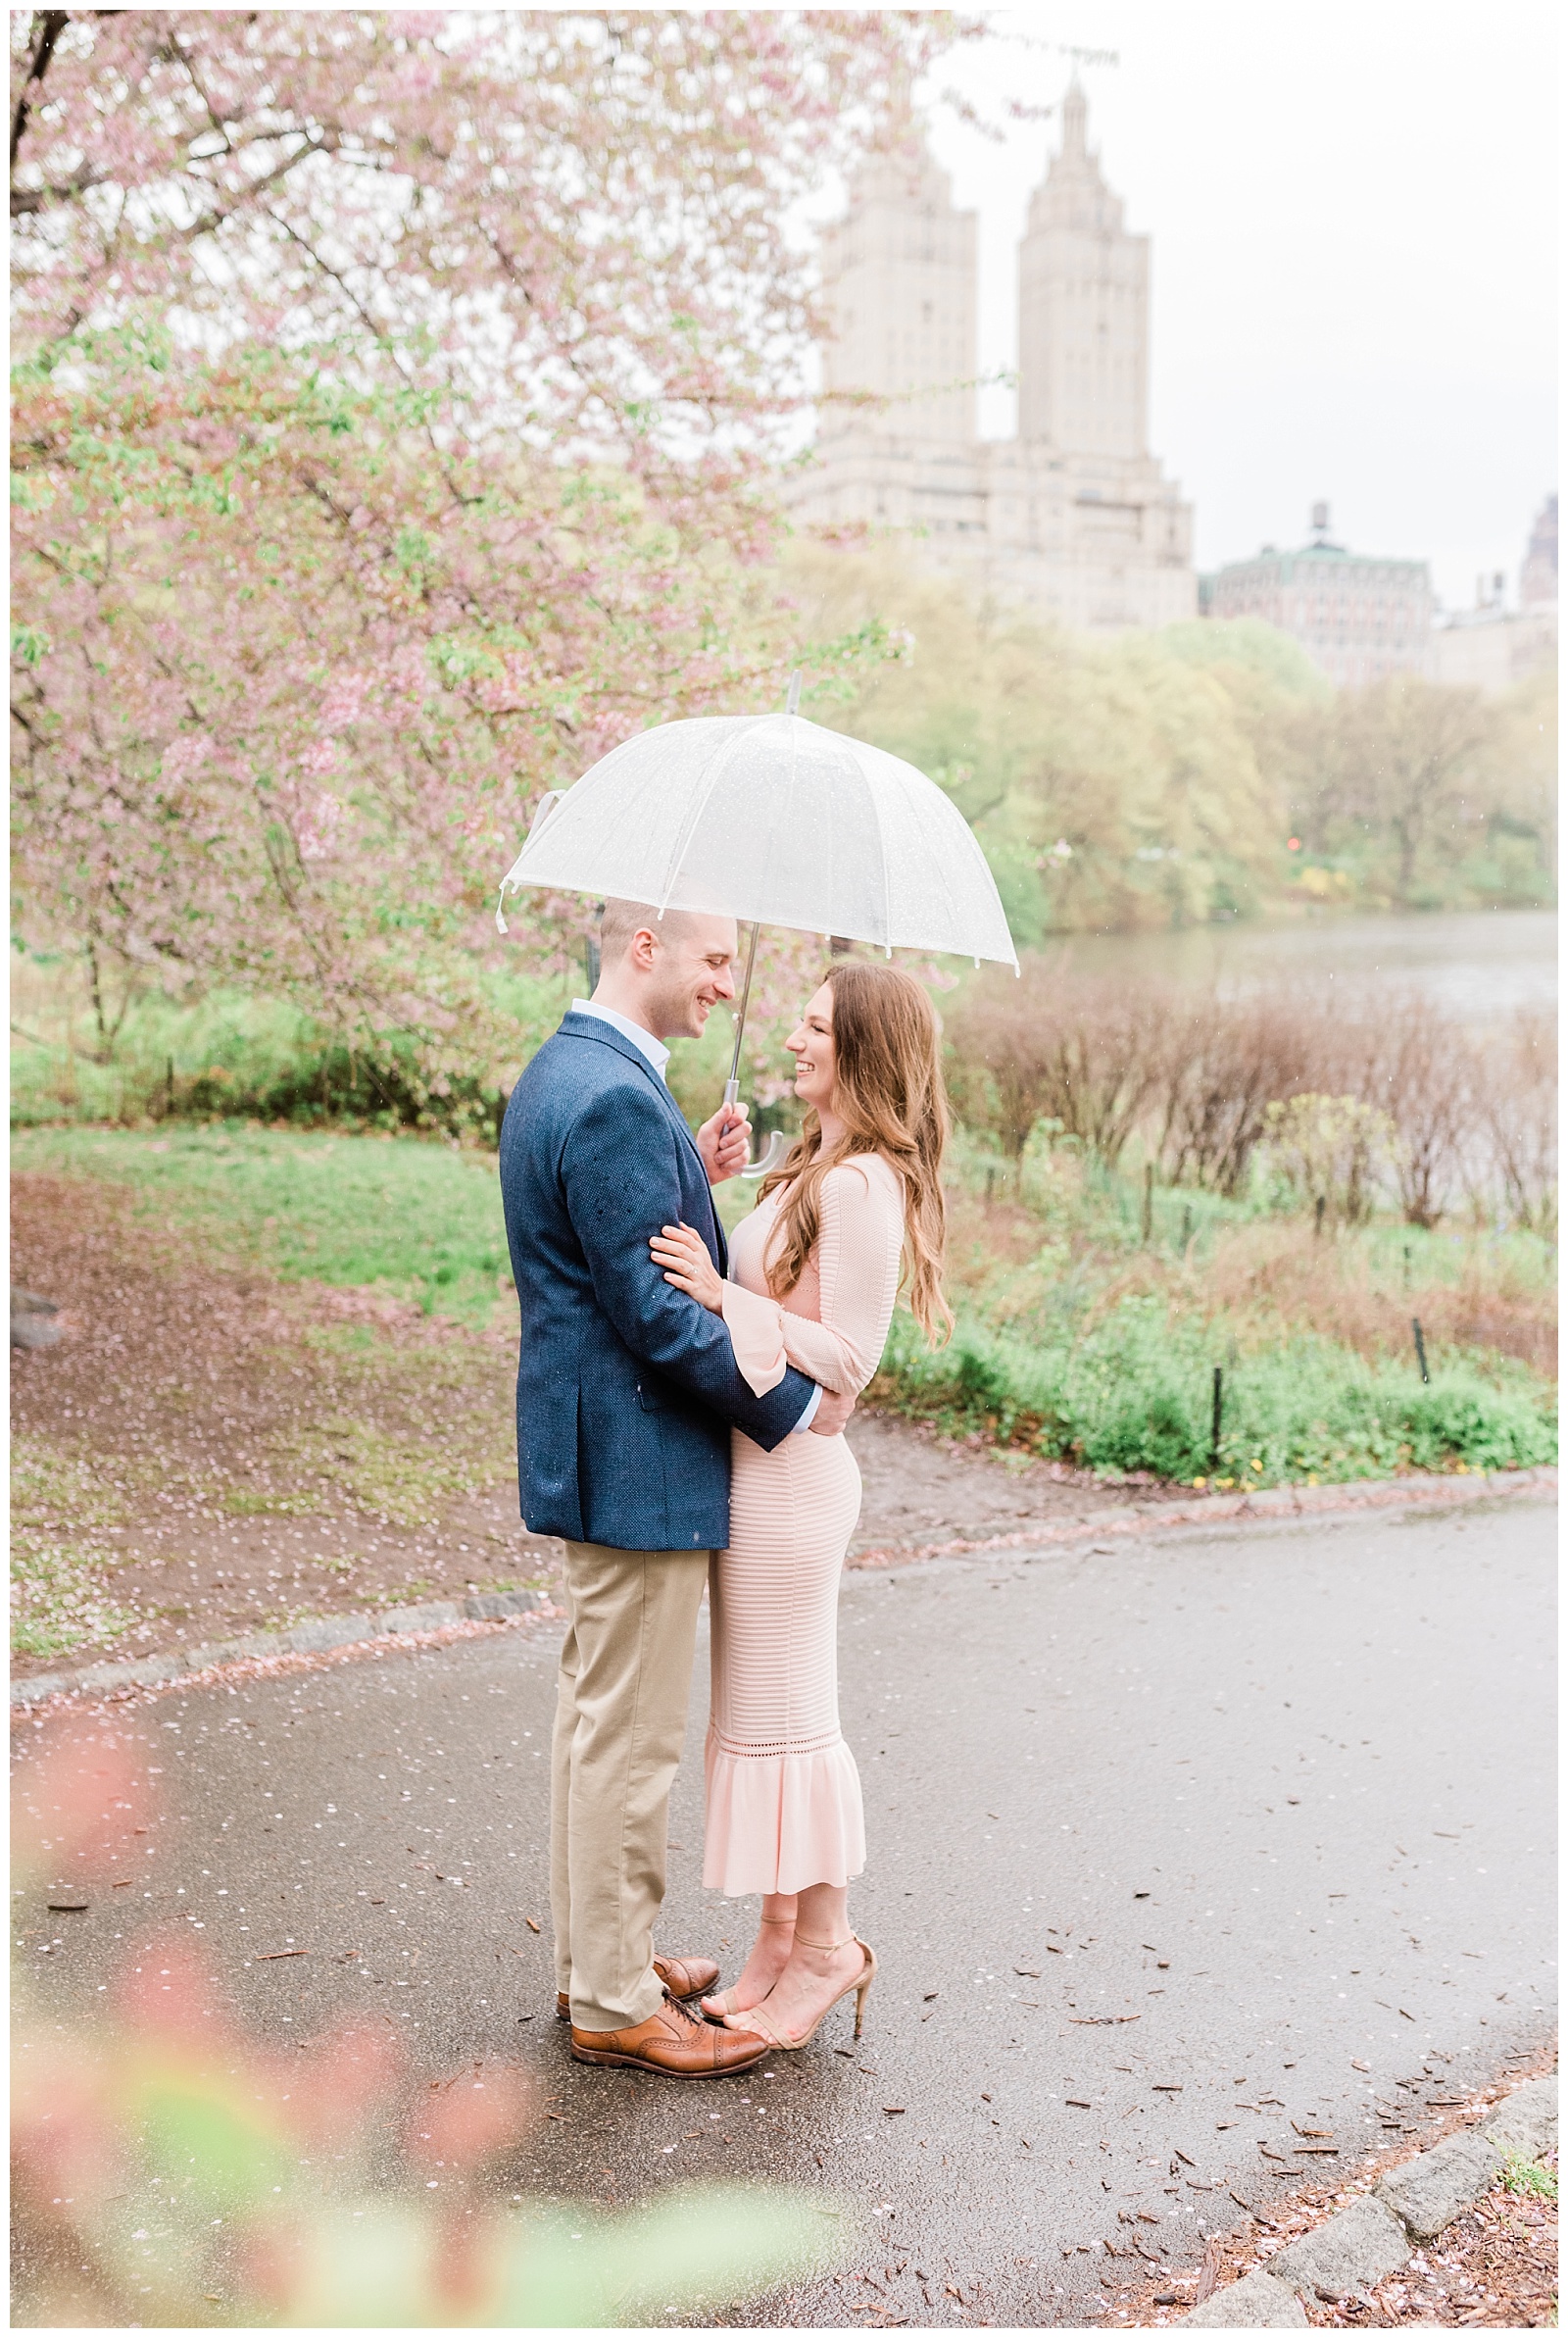 A couple smiles at each other under a clear umbrella as it rains in New York City.